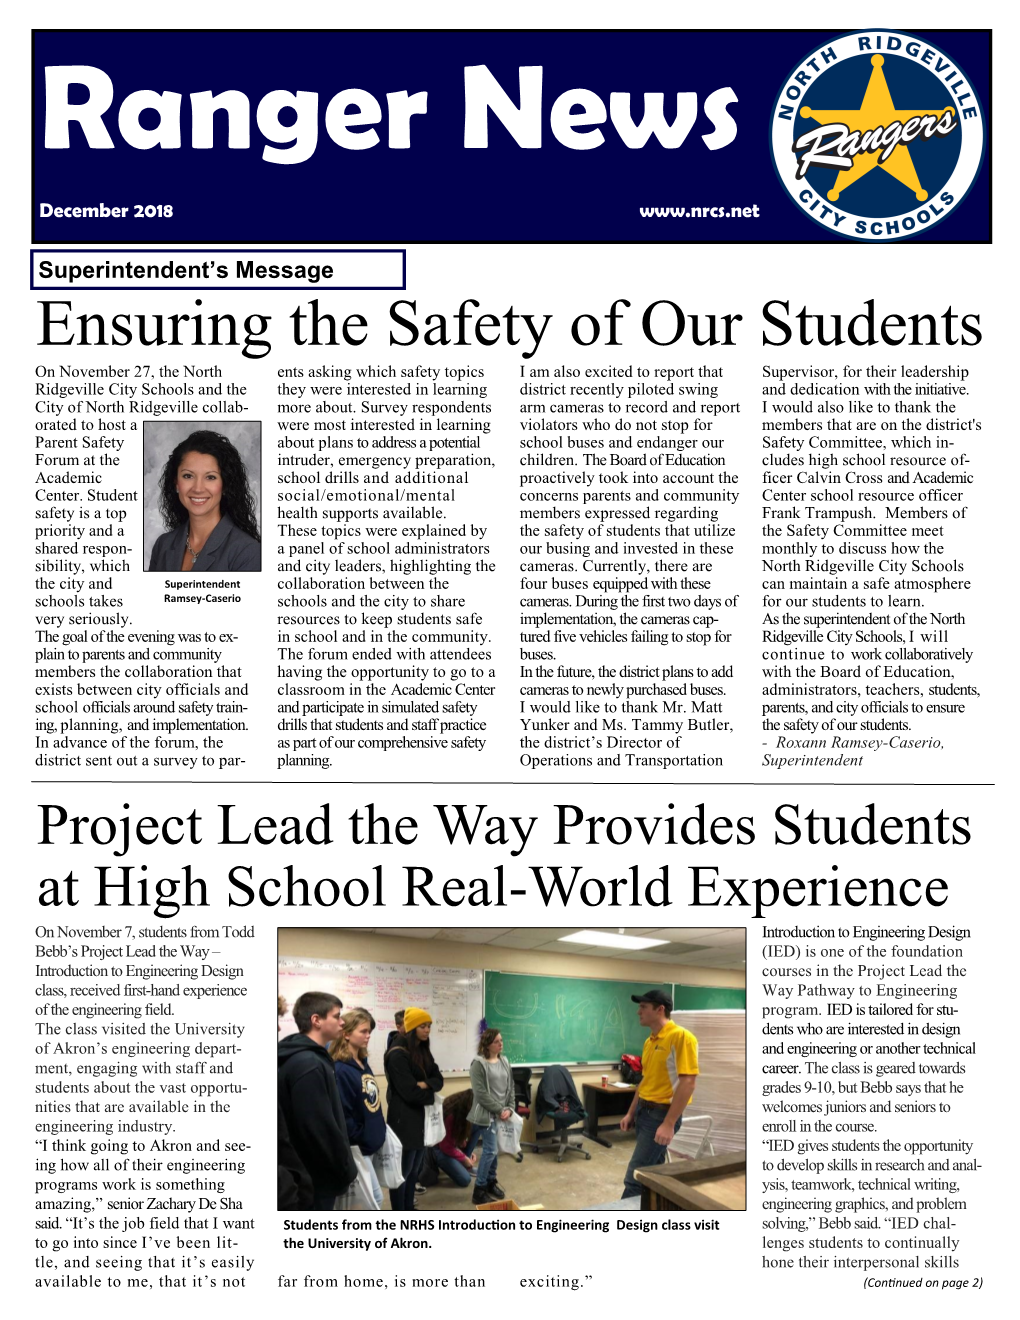 Ensuring the Safety of Our Students